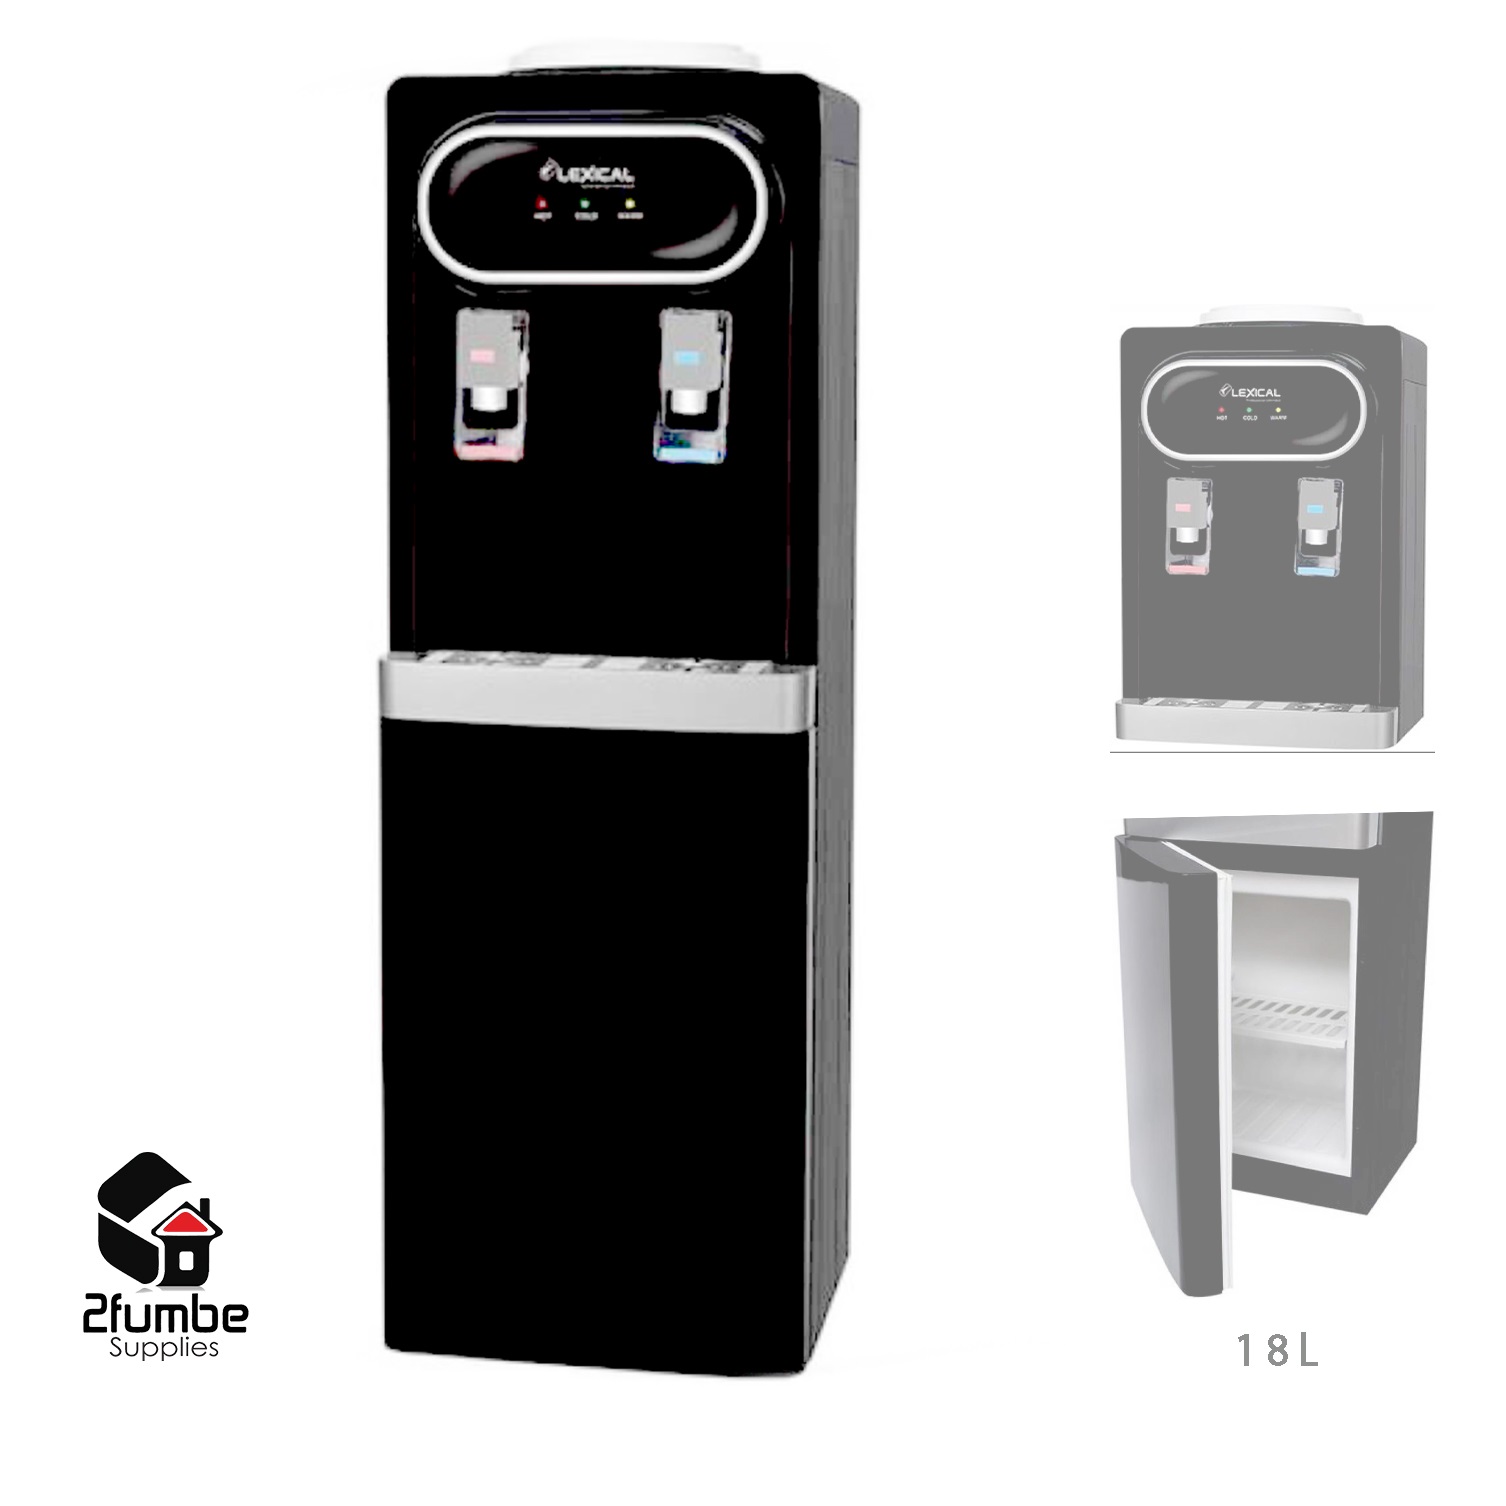 WDS07 LEXICAL 18L Water dispenser Black 2fumbe Supplies Limited